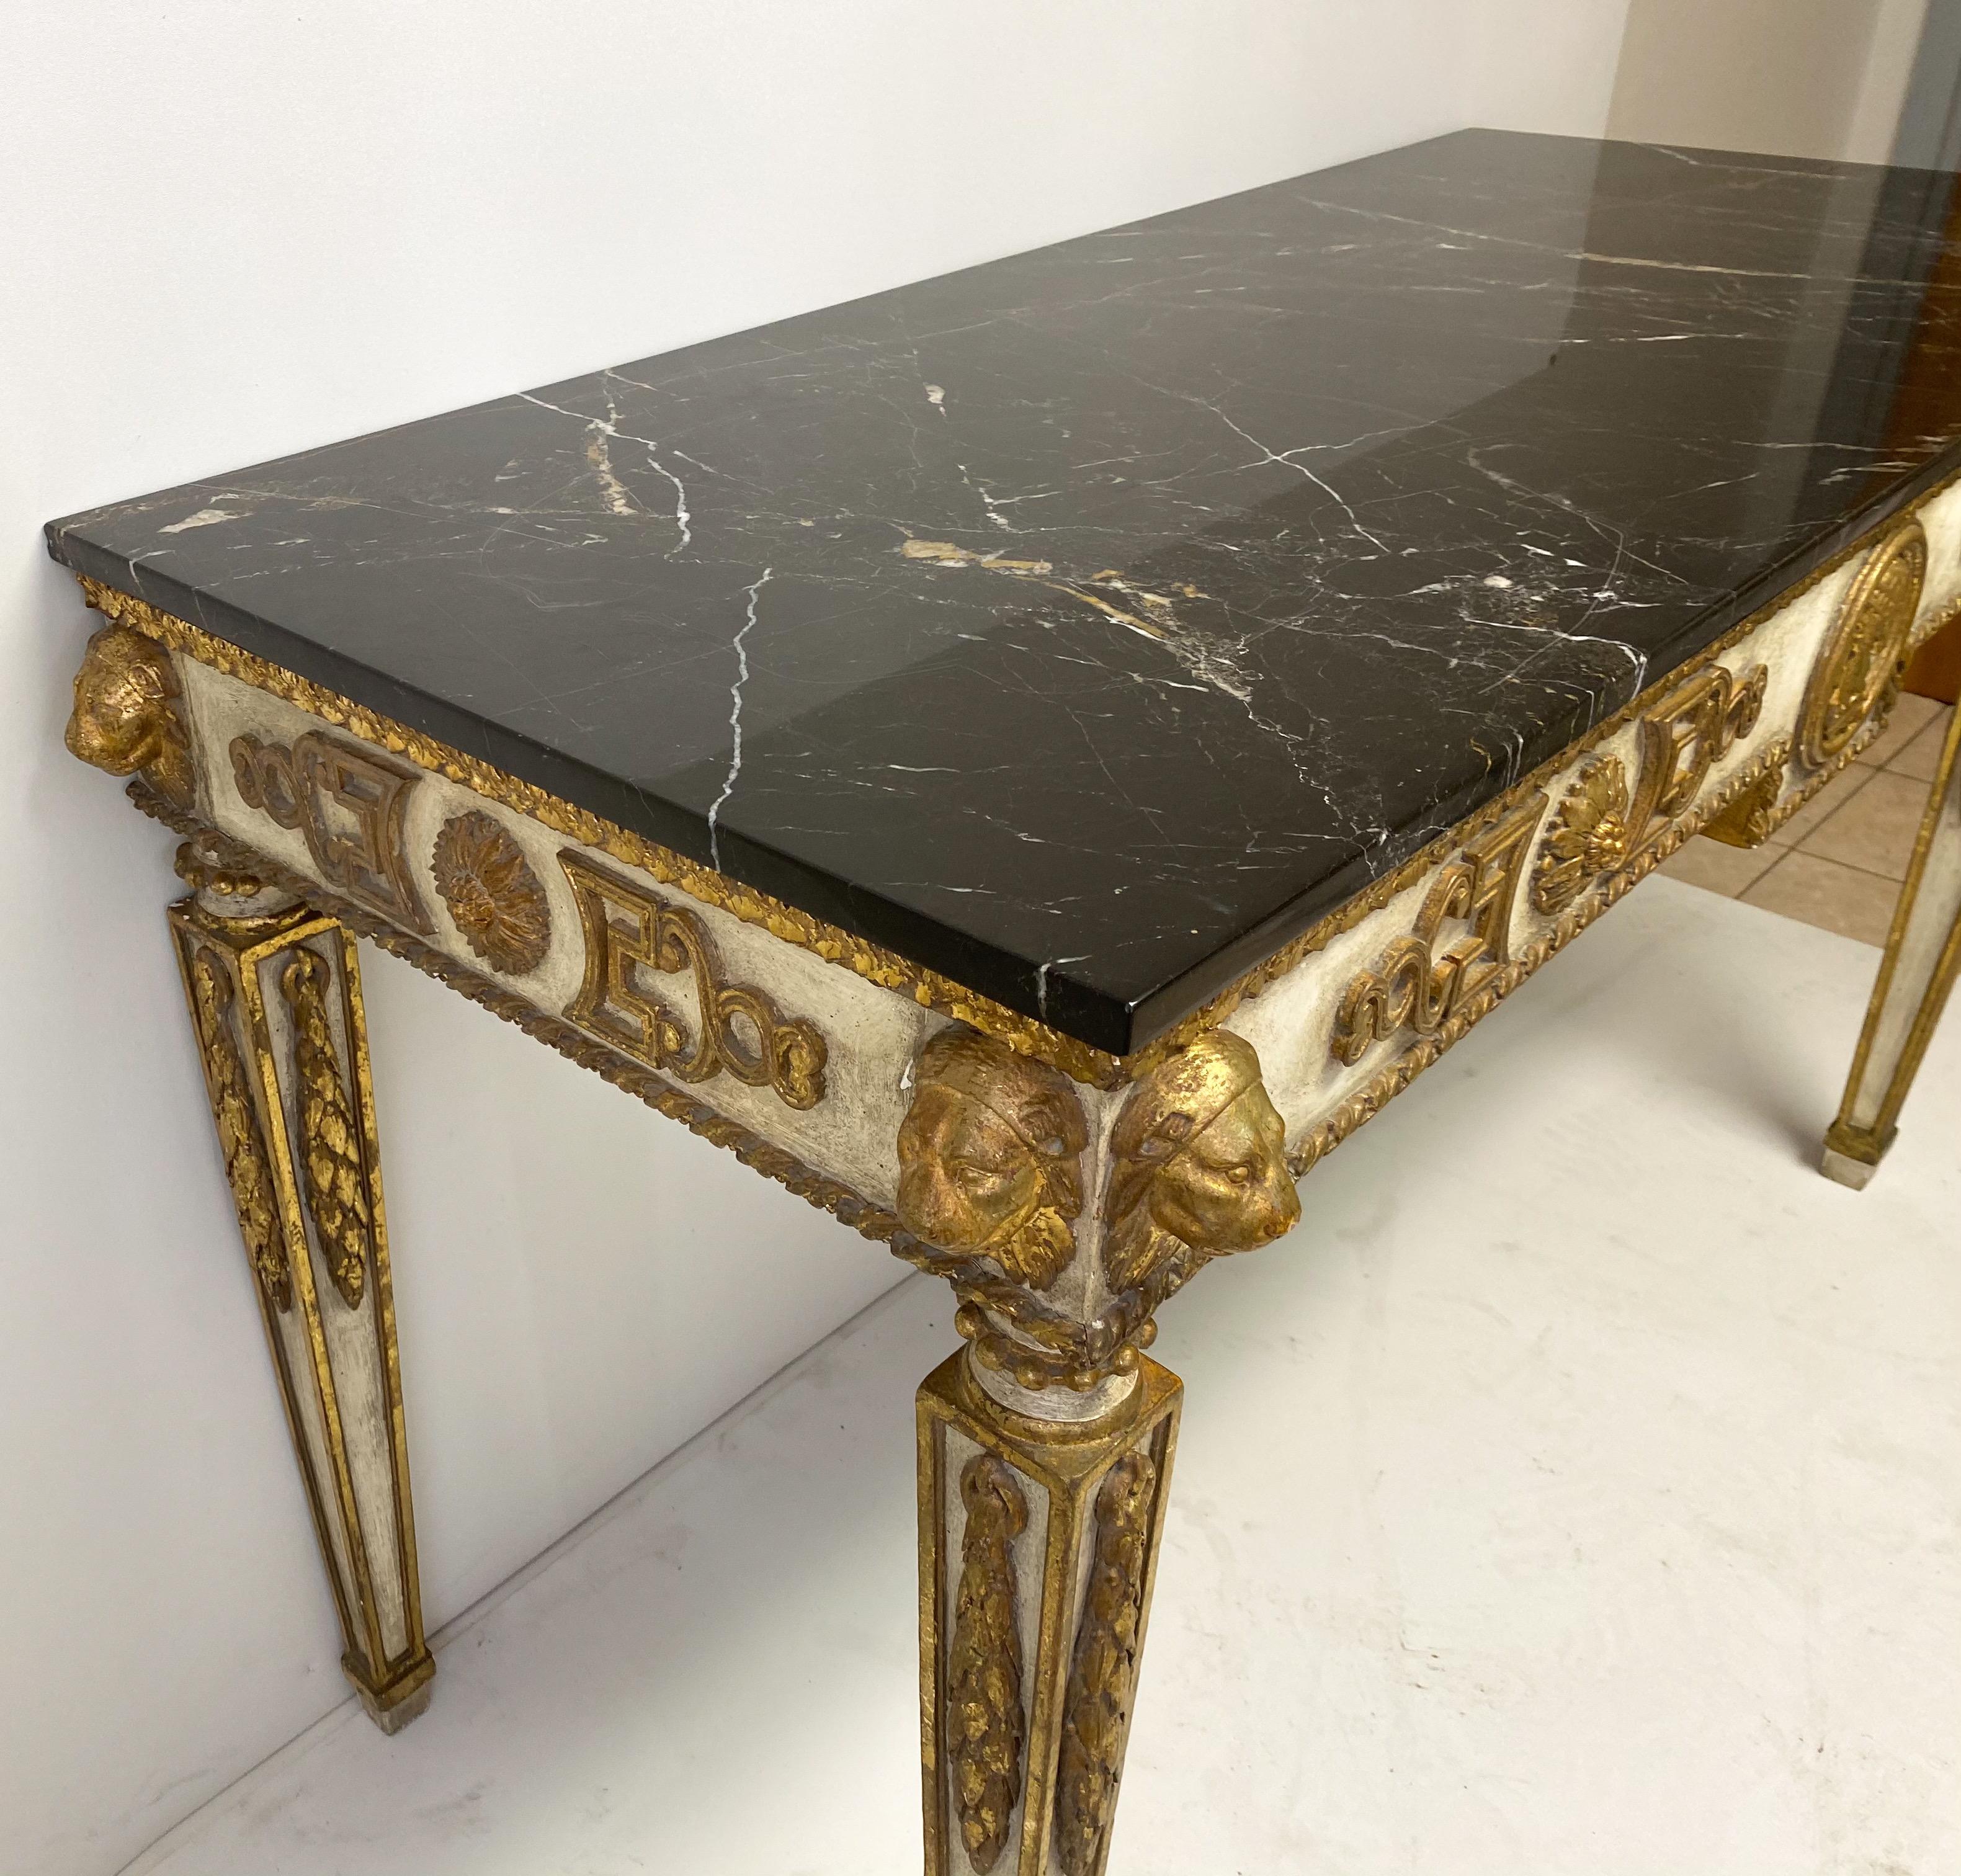 20th Century Midcentury Neoclassical Style Italian Marble-Top Console Table